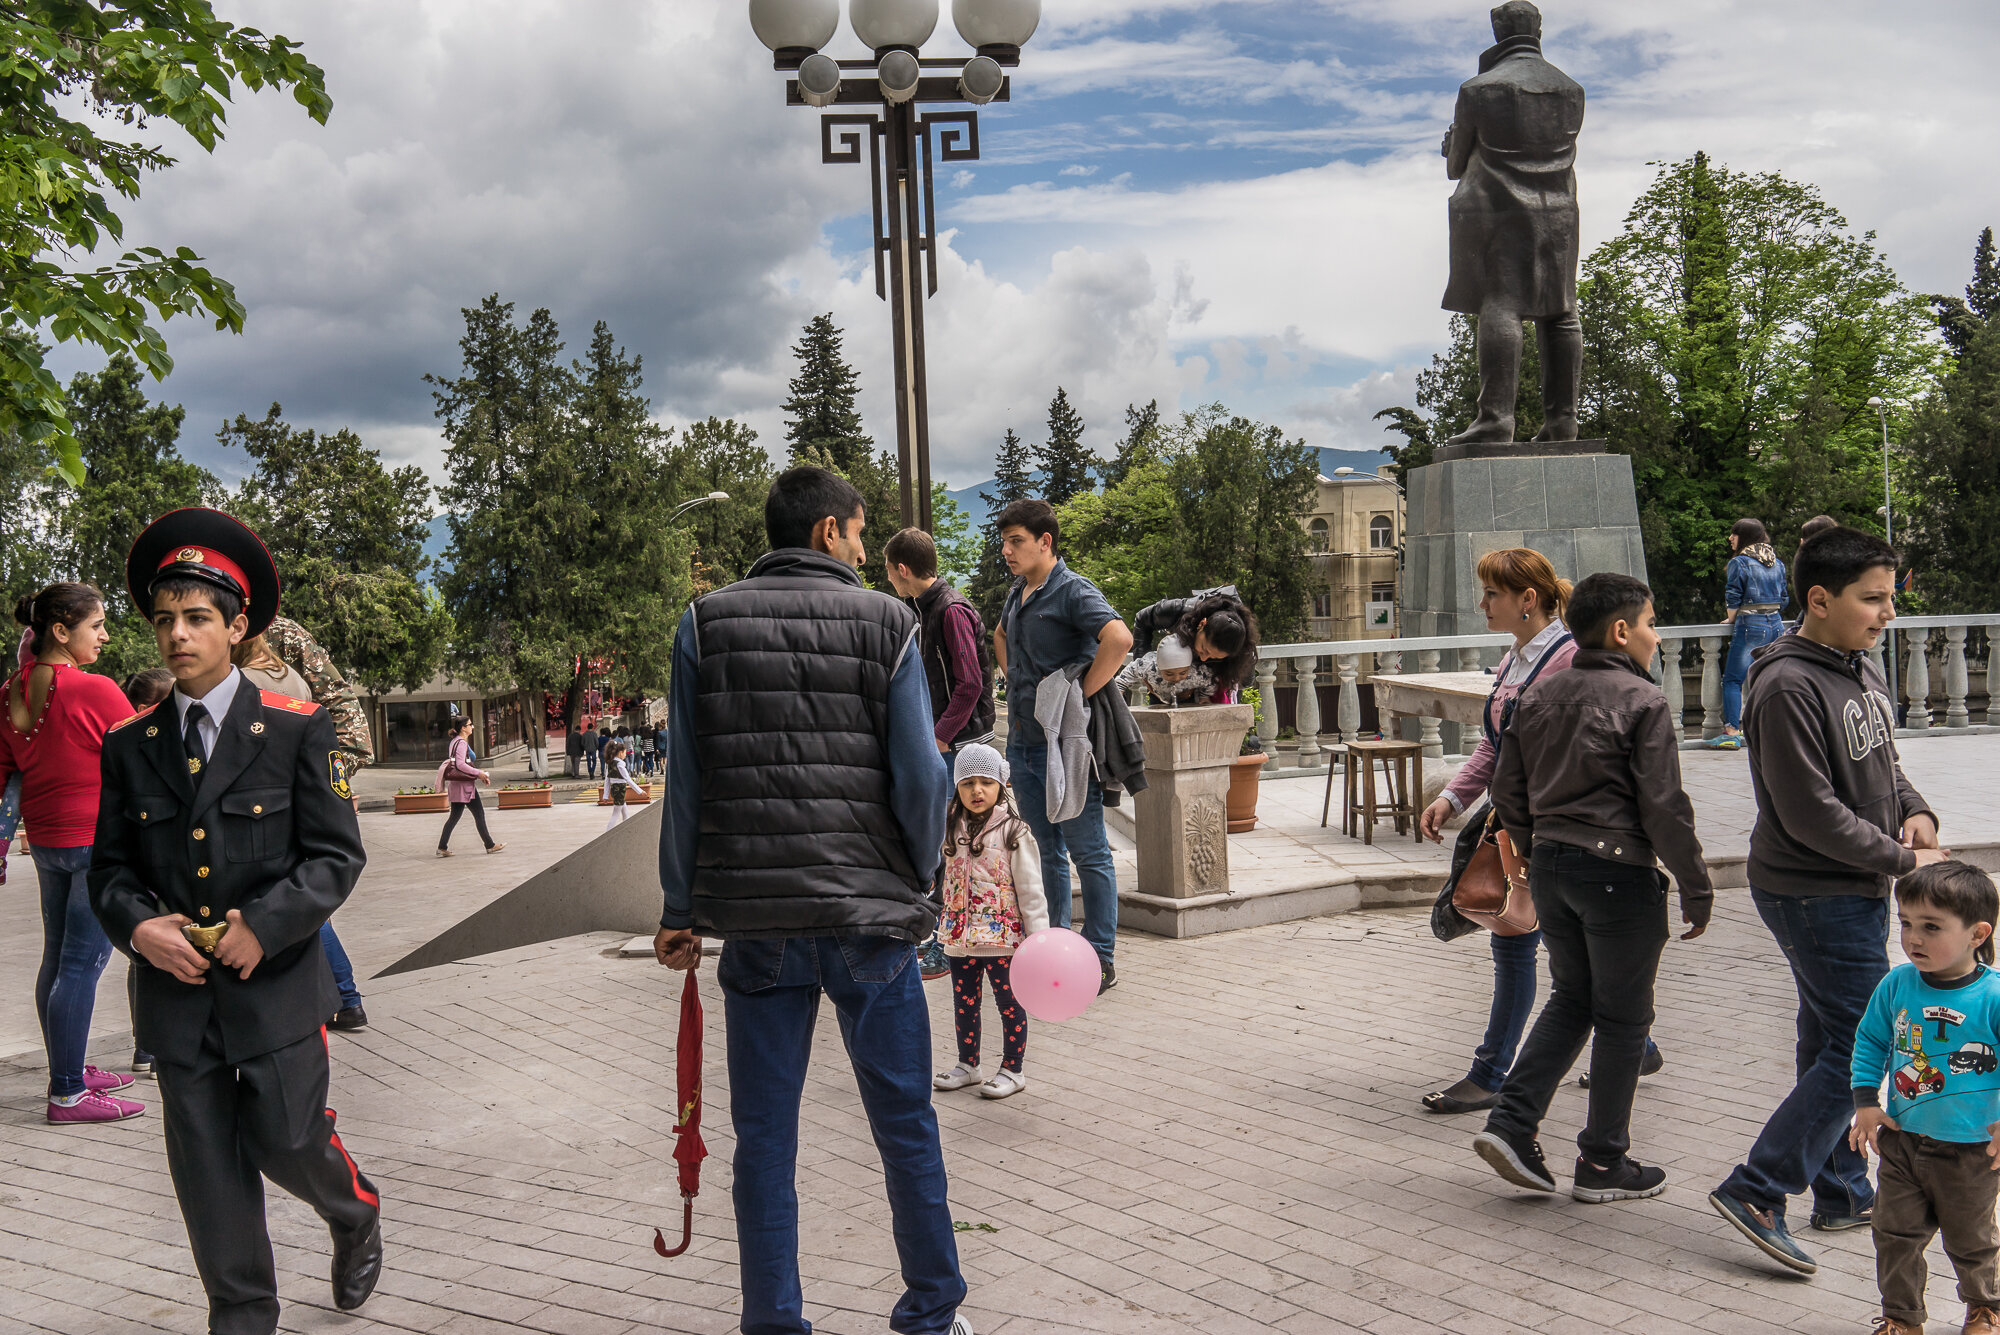  People gather in a local park to enjoy the warm weather following a ceremony commemorating both the victory over Nazi Germany in the Second World War as well as the fall of the strategic town of Shushi to Armenian forces. Stepanakert, Nagorno-Karaba